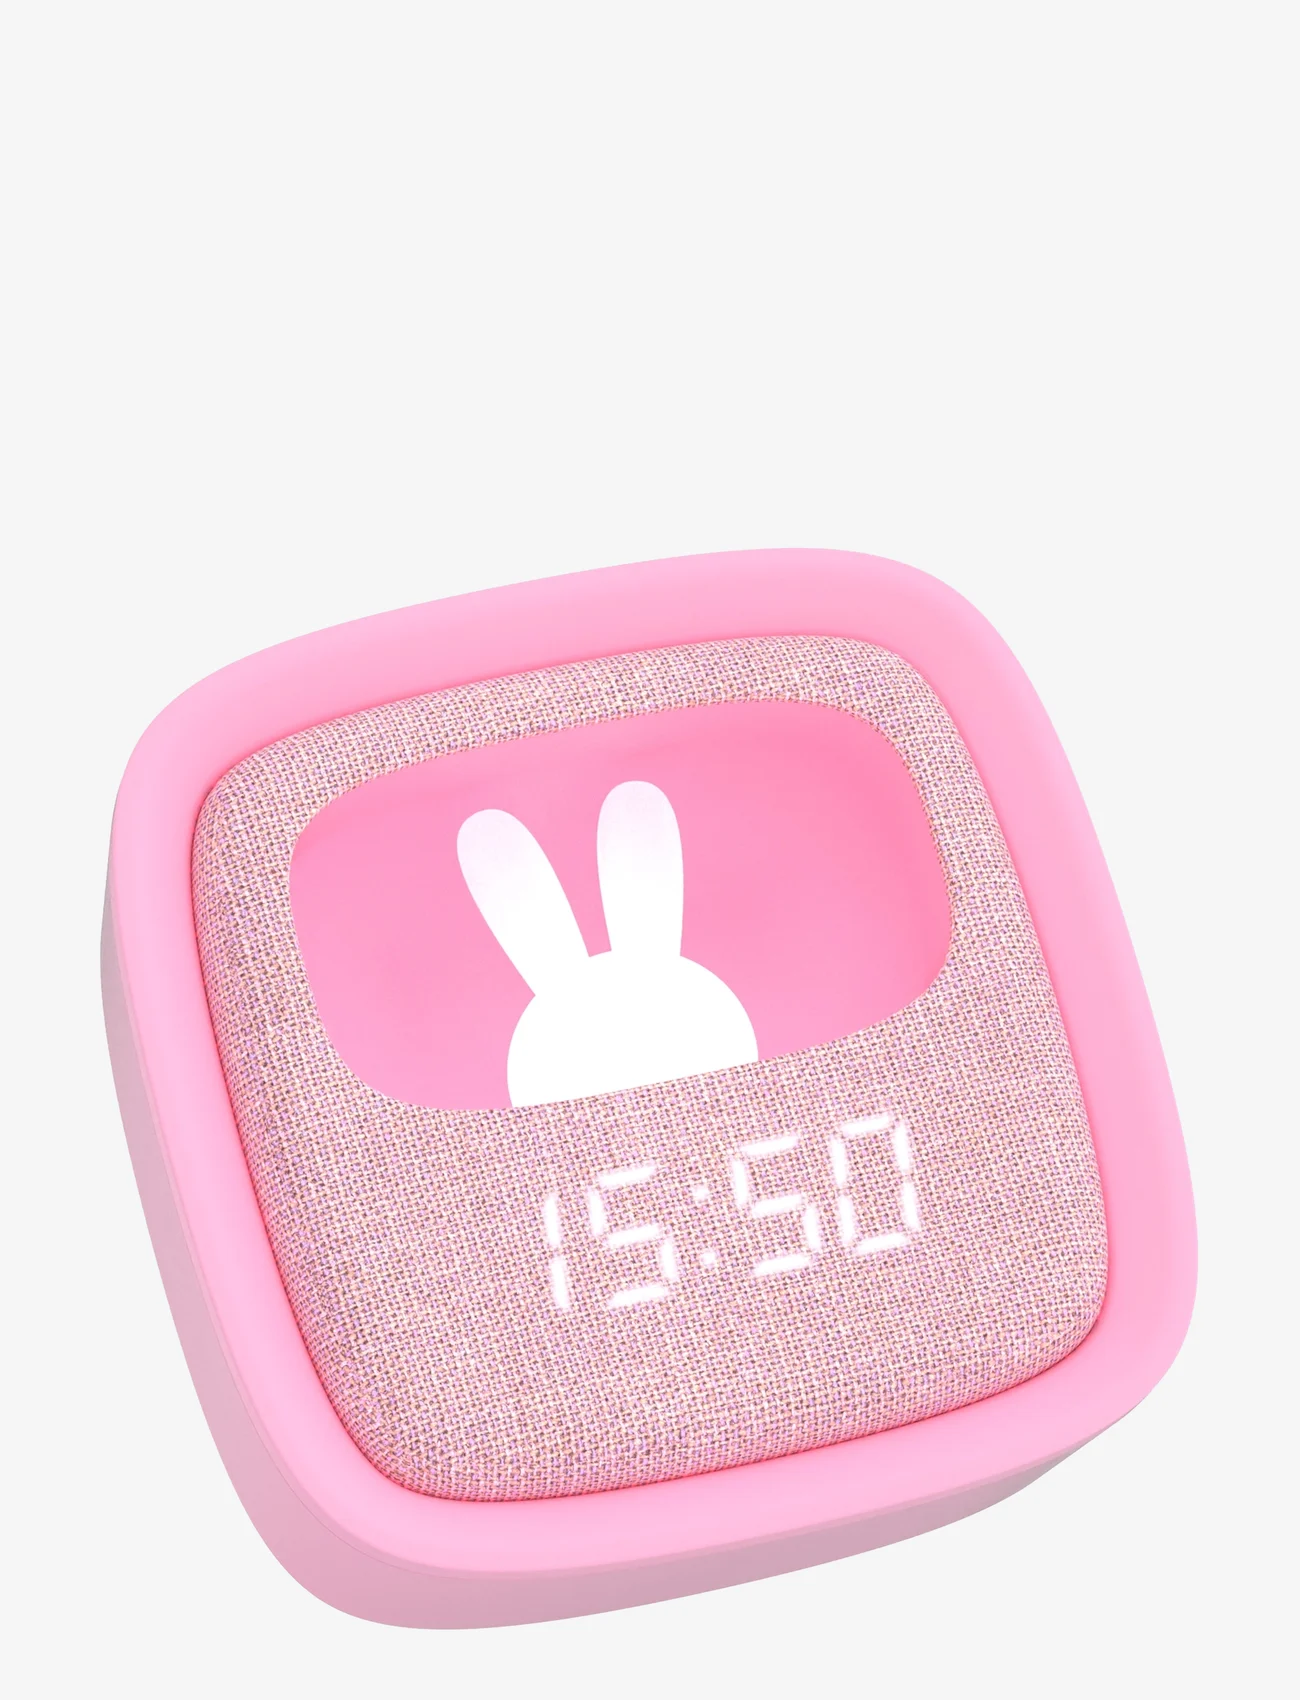 Mobility On Board - Billy Clock and light - lowest prices - marshmallow - 0